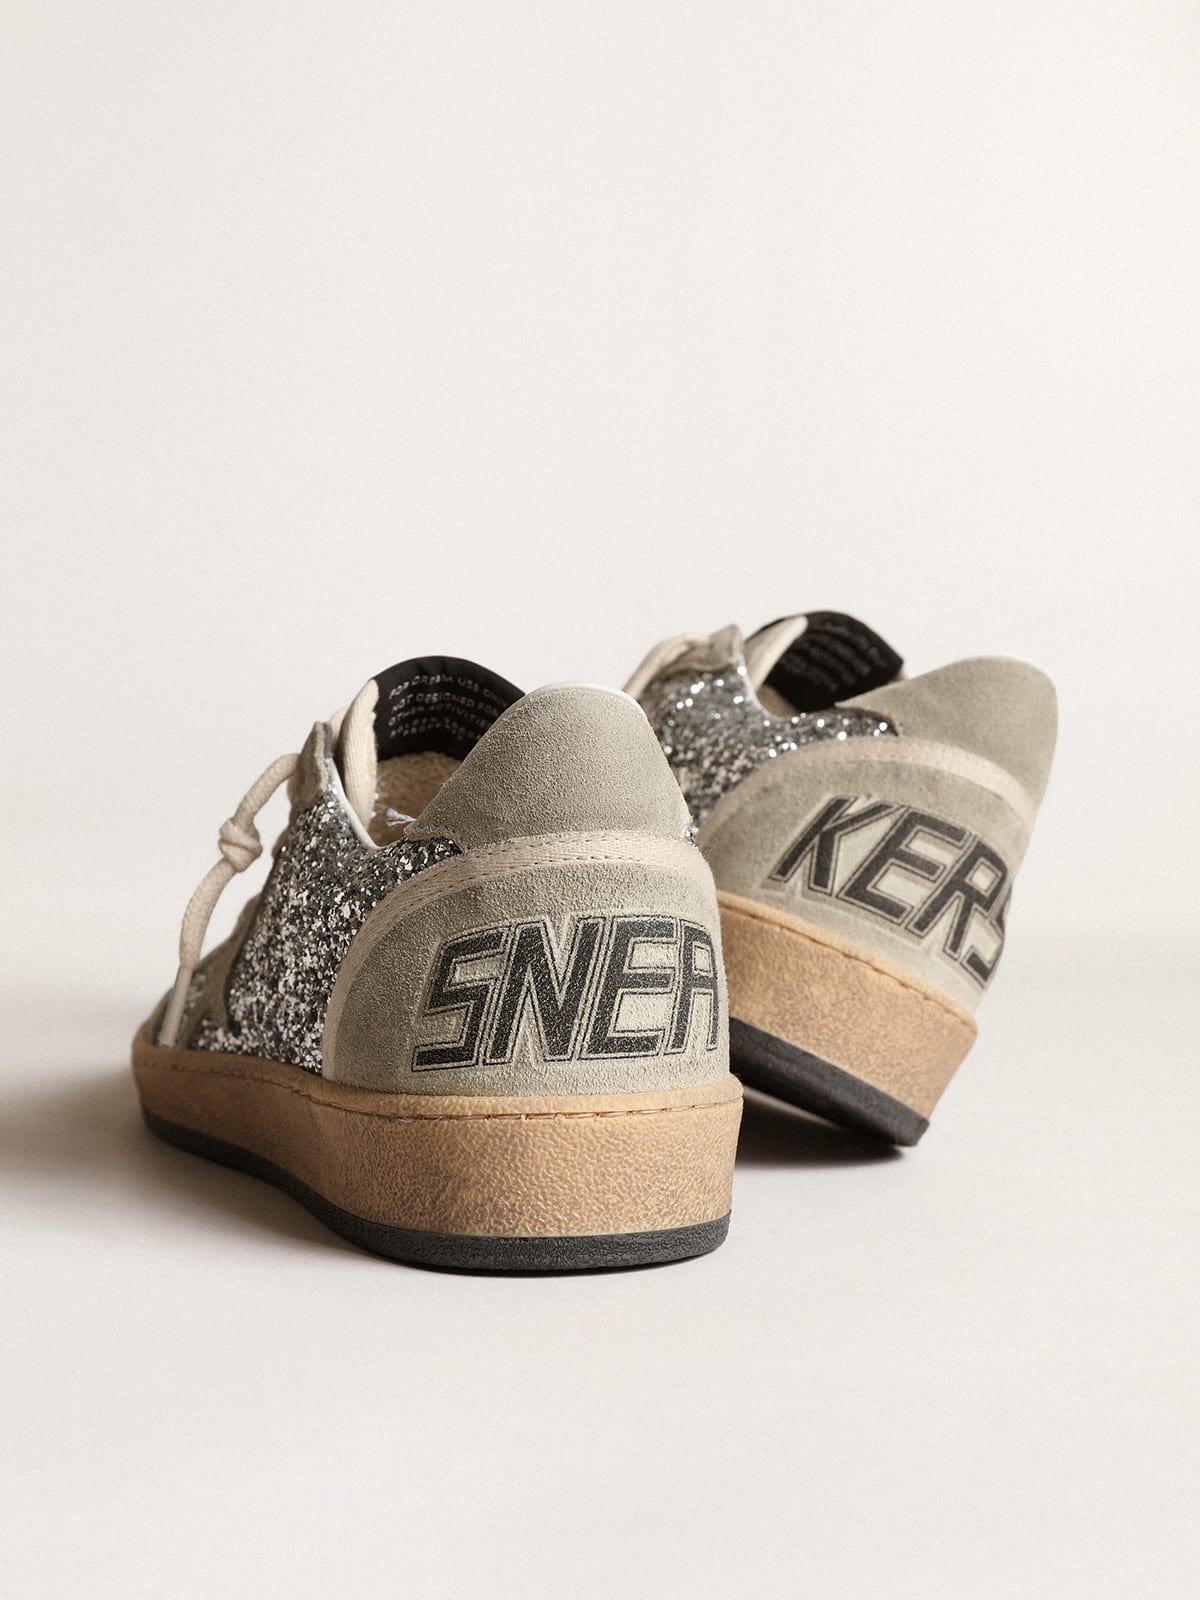 Golden Goose - Ball Star in silver glitter with ice-gray suede inserts in 